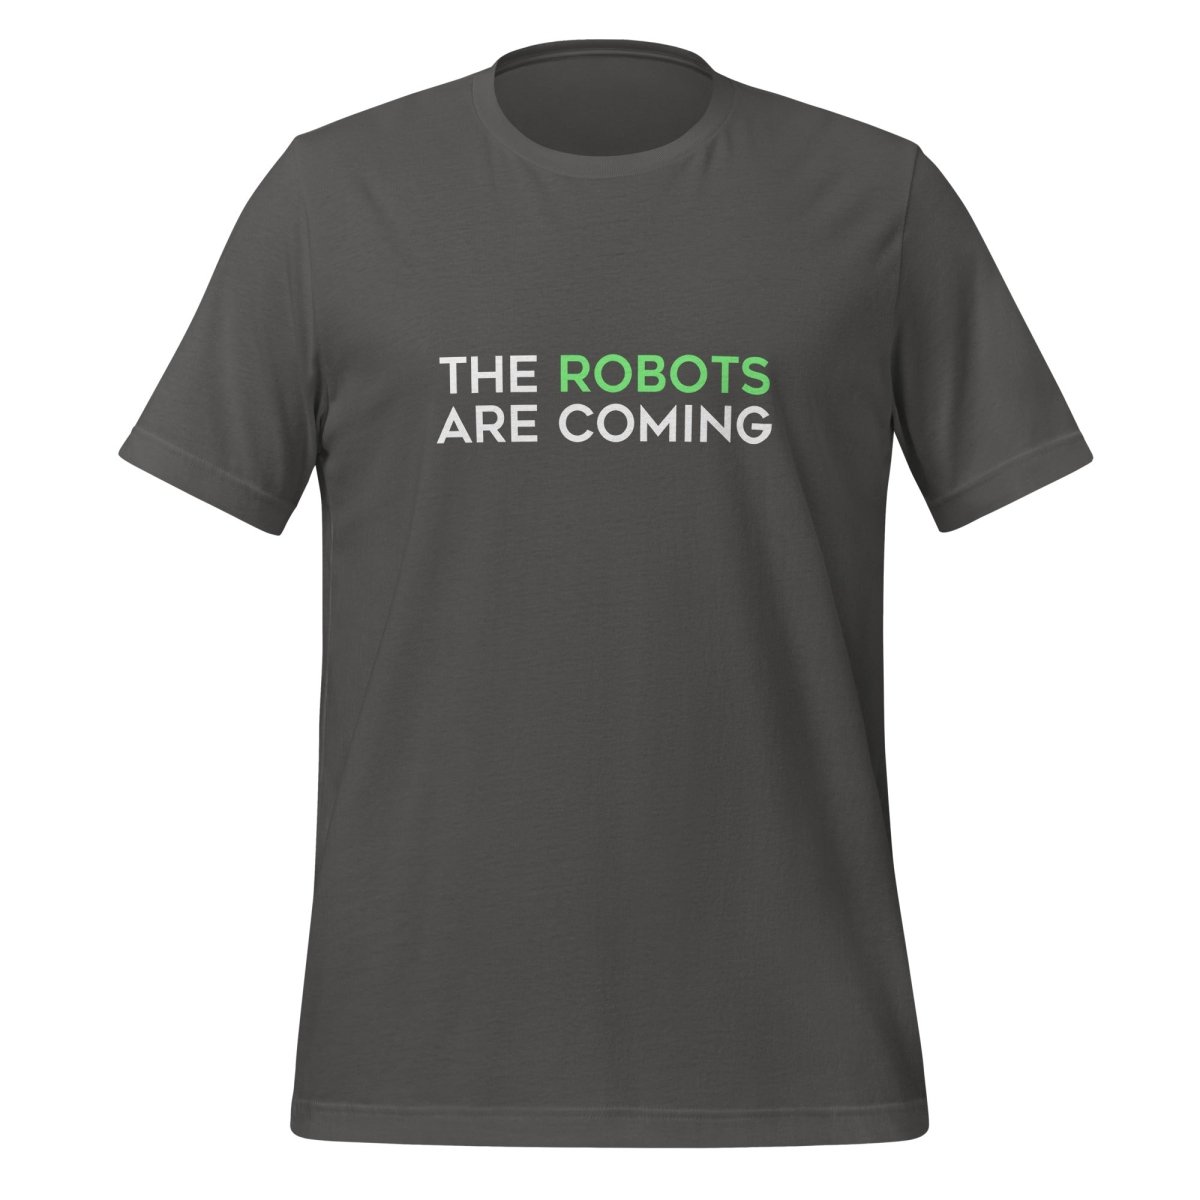 The Robots Are Coming (Green) T - Shirt 1 (unisex) - Asphalt - AI Store